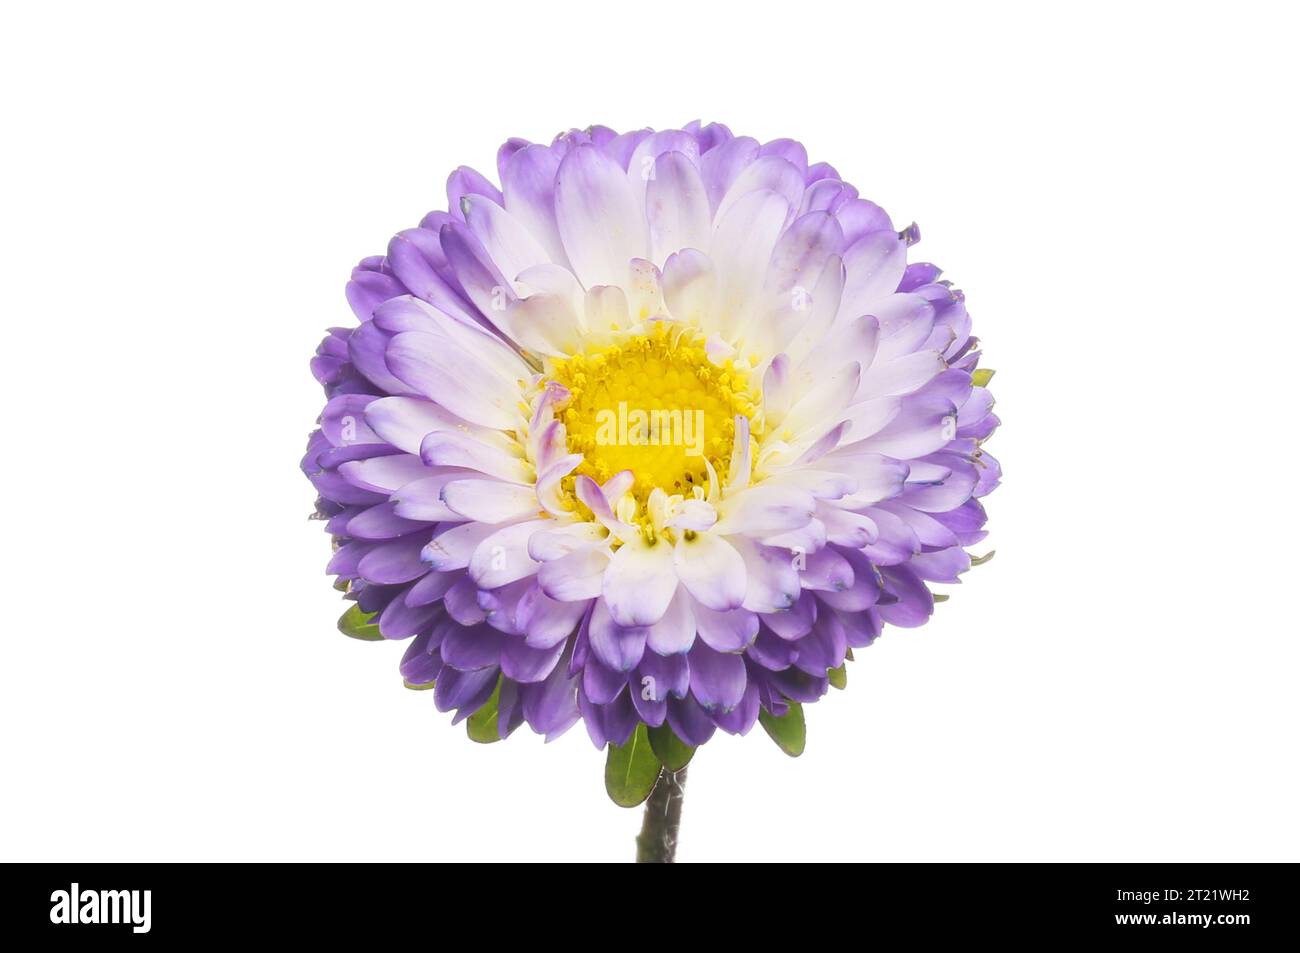 Light blue and yellow aster flower isolated against white Stock Photo